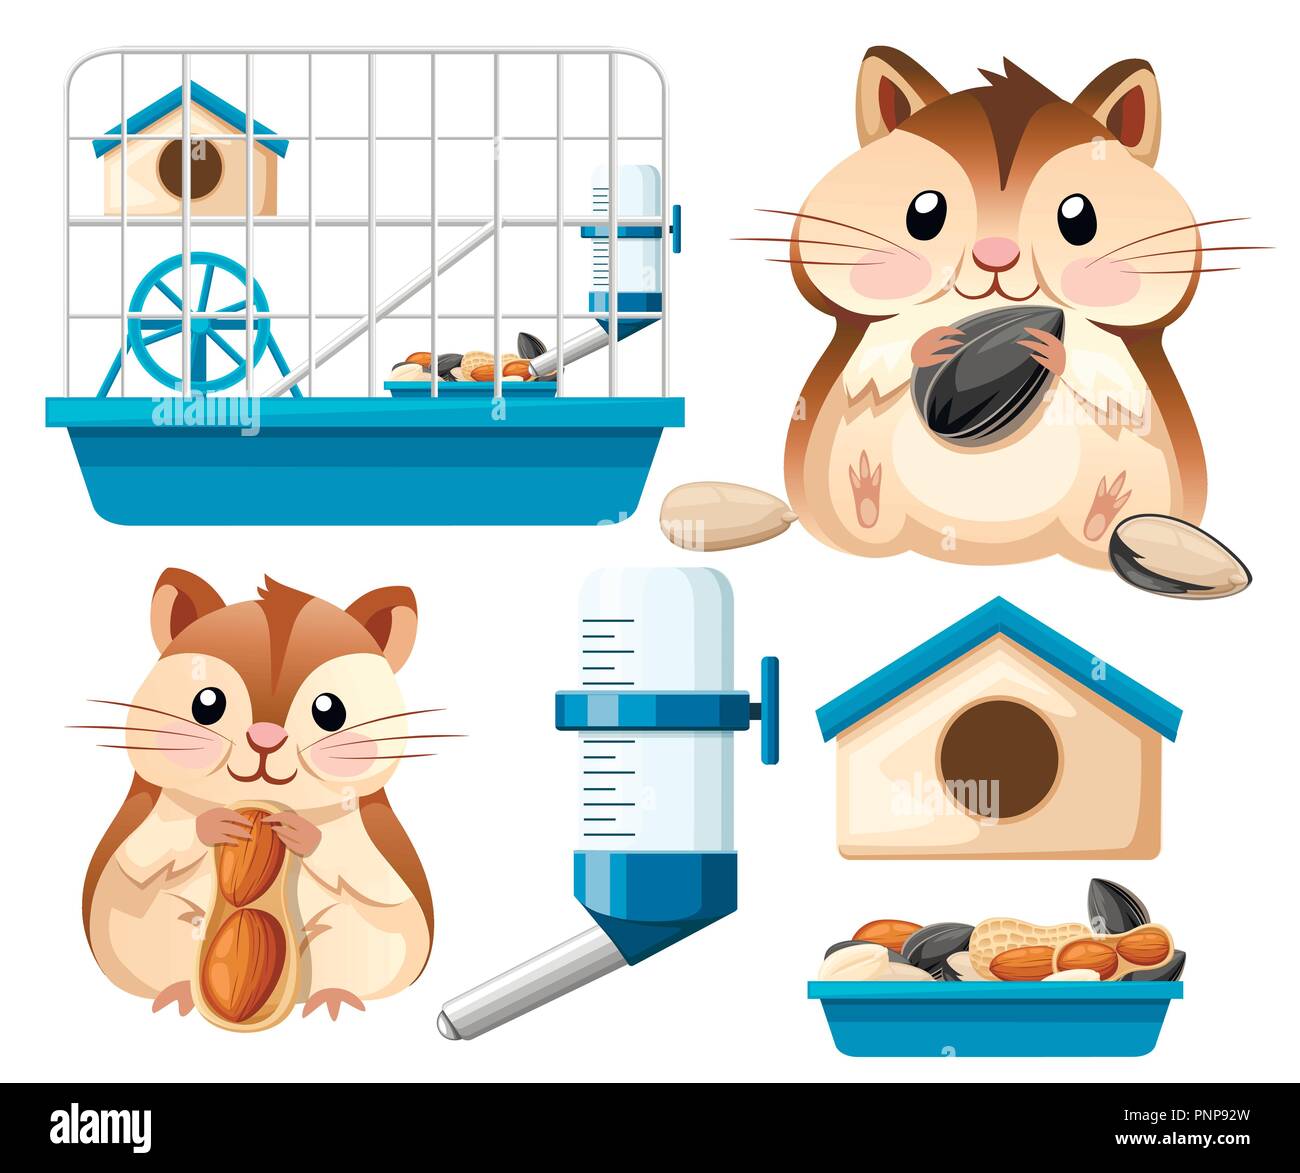 Hamster icon collection. Cute hamster sit and holding a sunflower seed, and nut. Hamster cage, wheel and automatic drinker. Cartoon character design.  Stock Vector